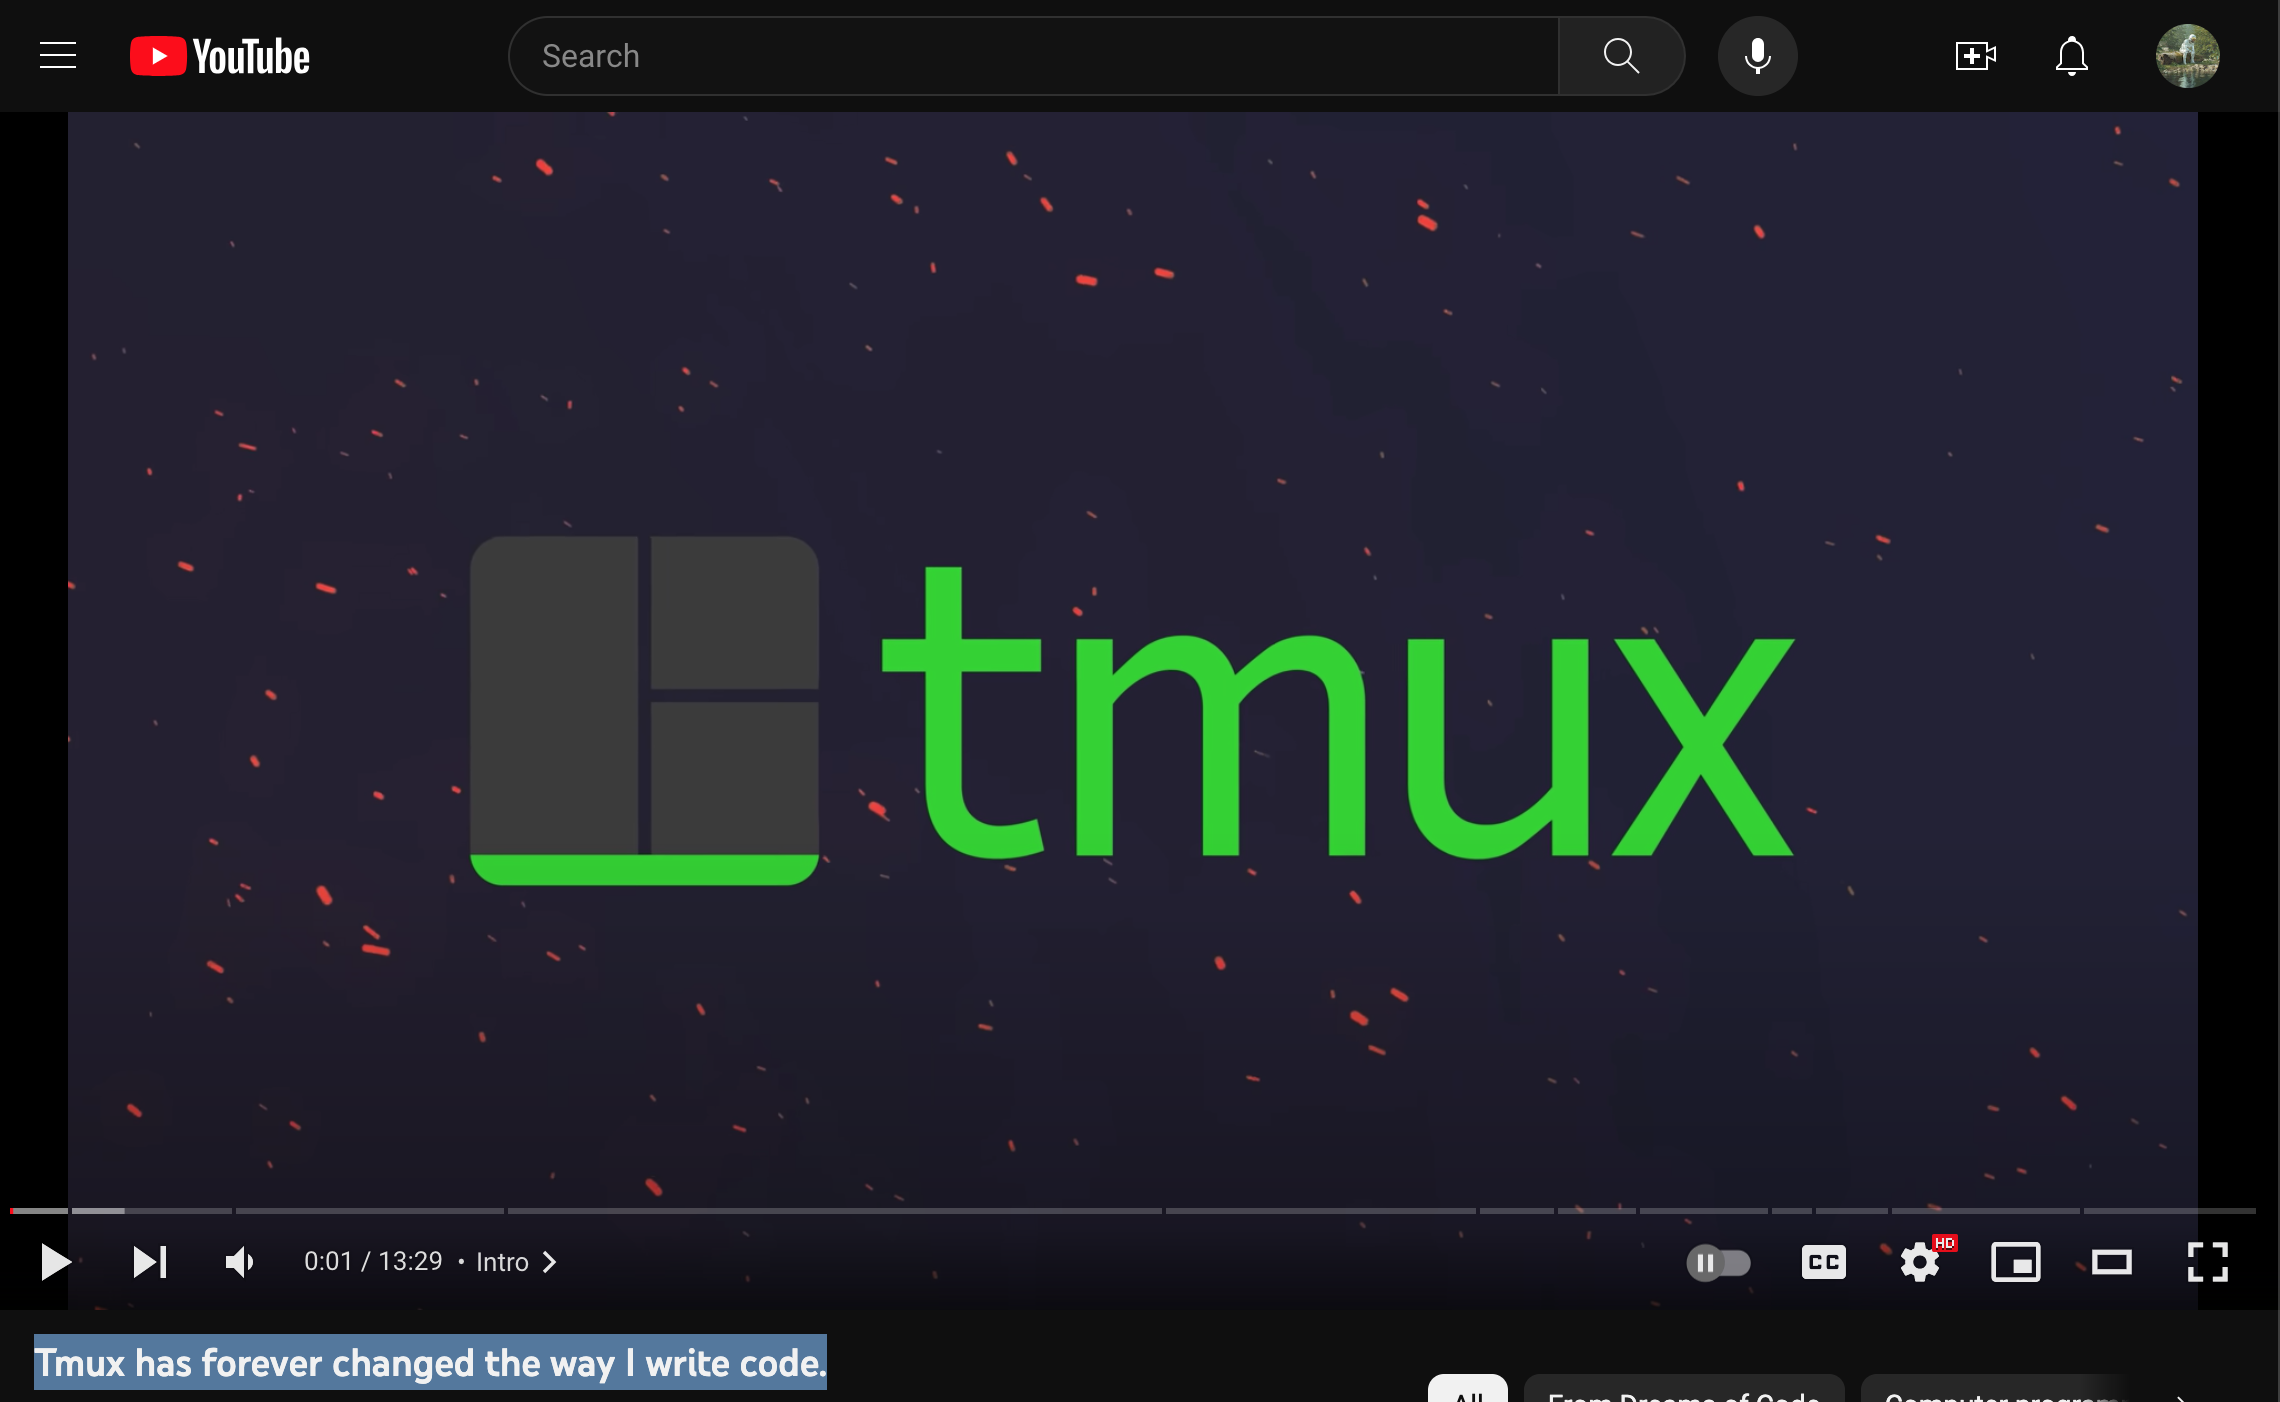 Tmux has forever changed the way I write code.